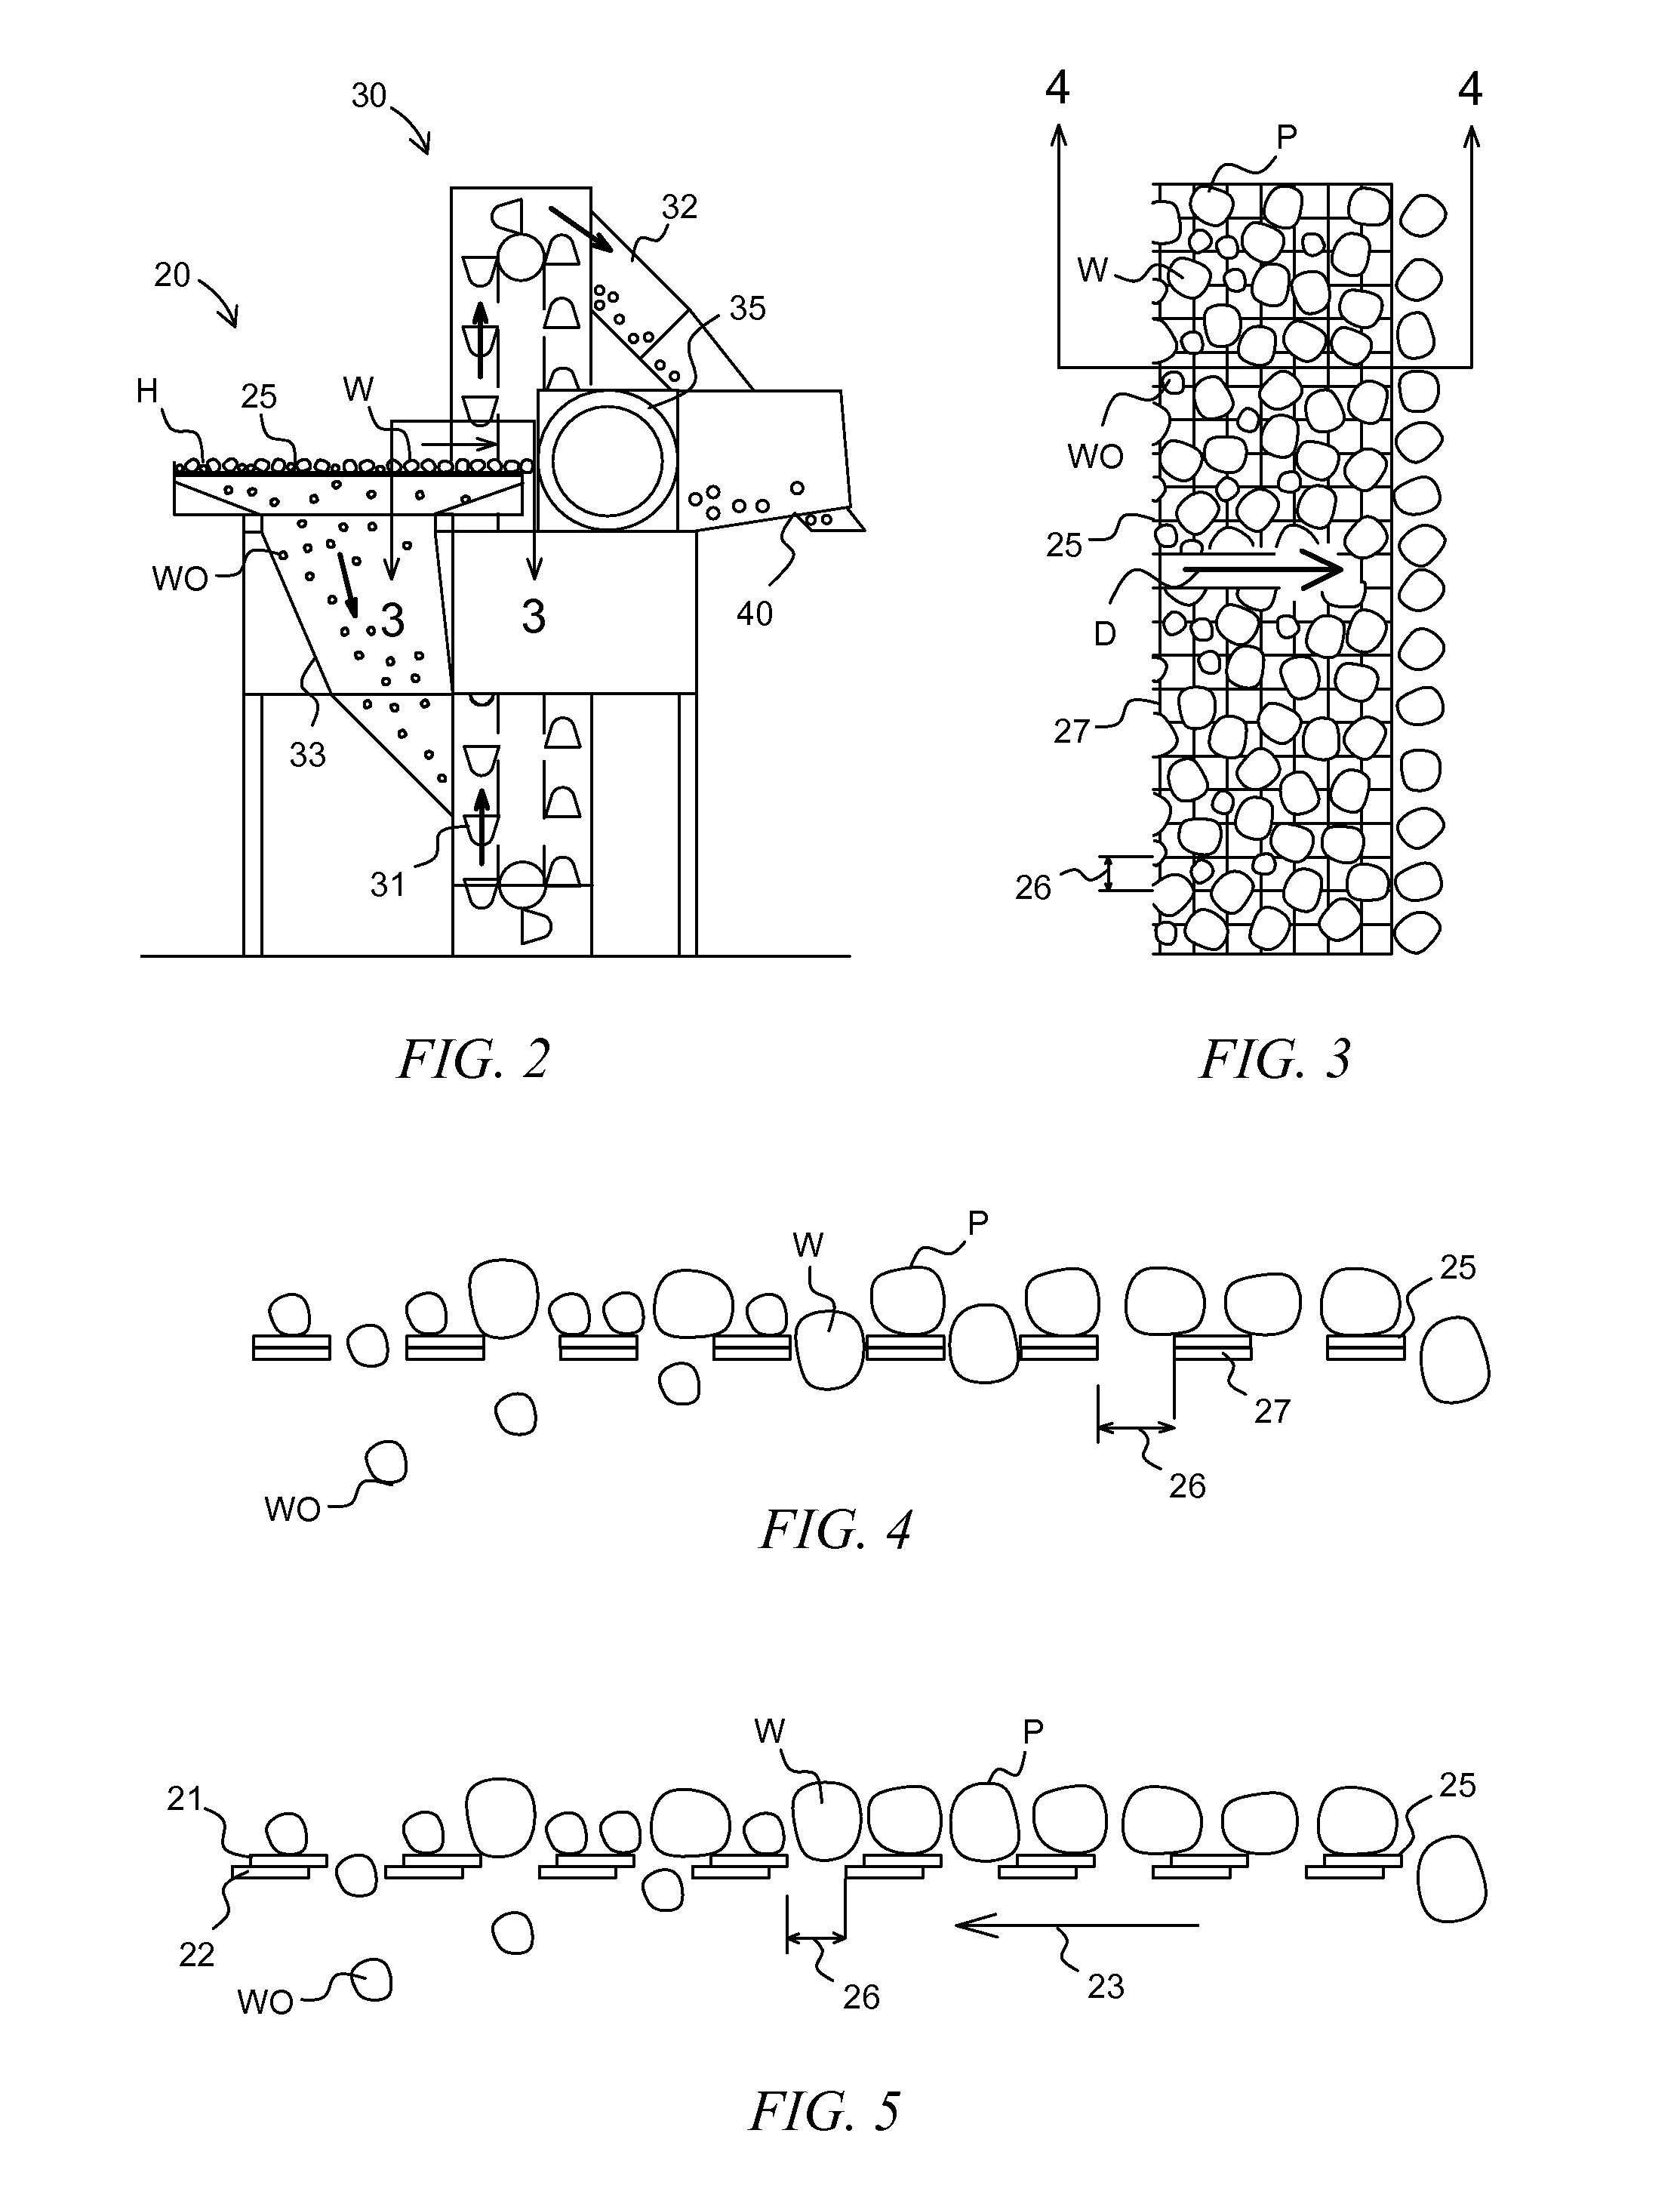 System, device and method for processing harvested walnuts